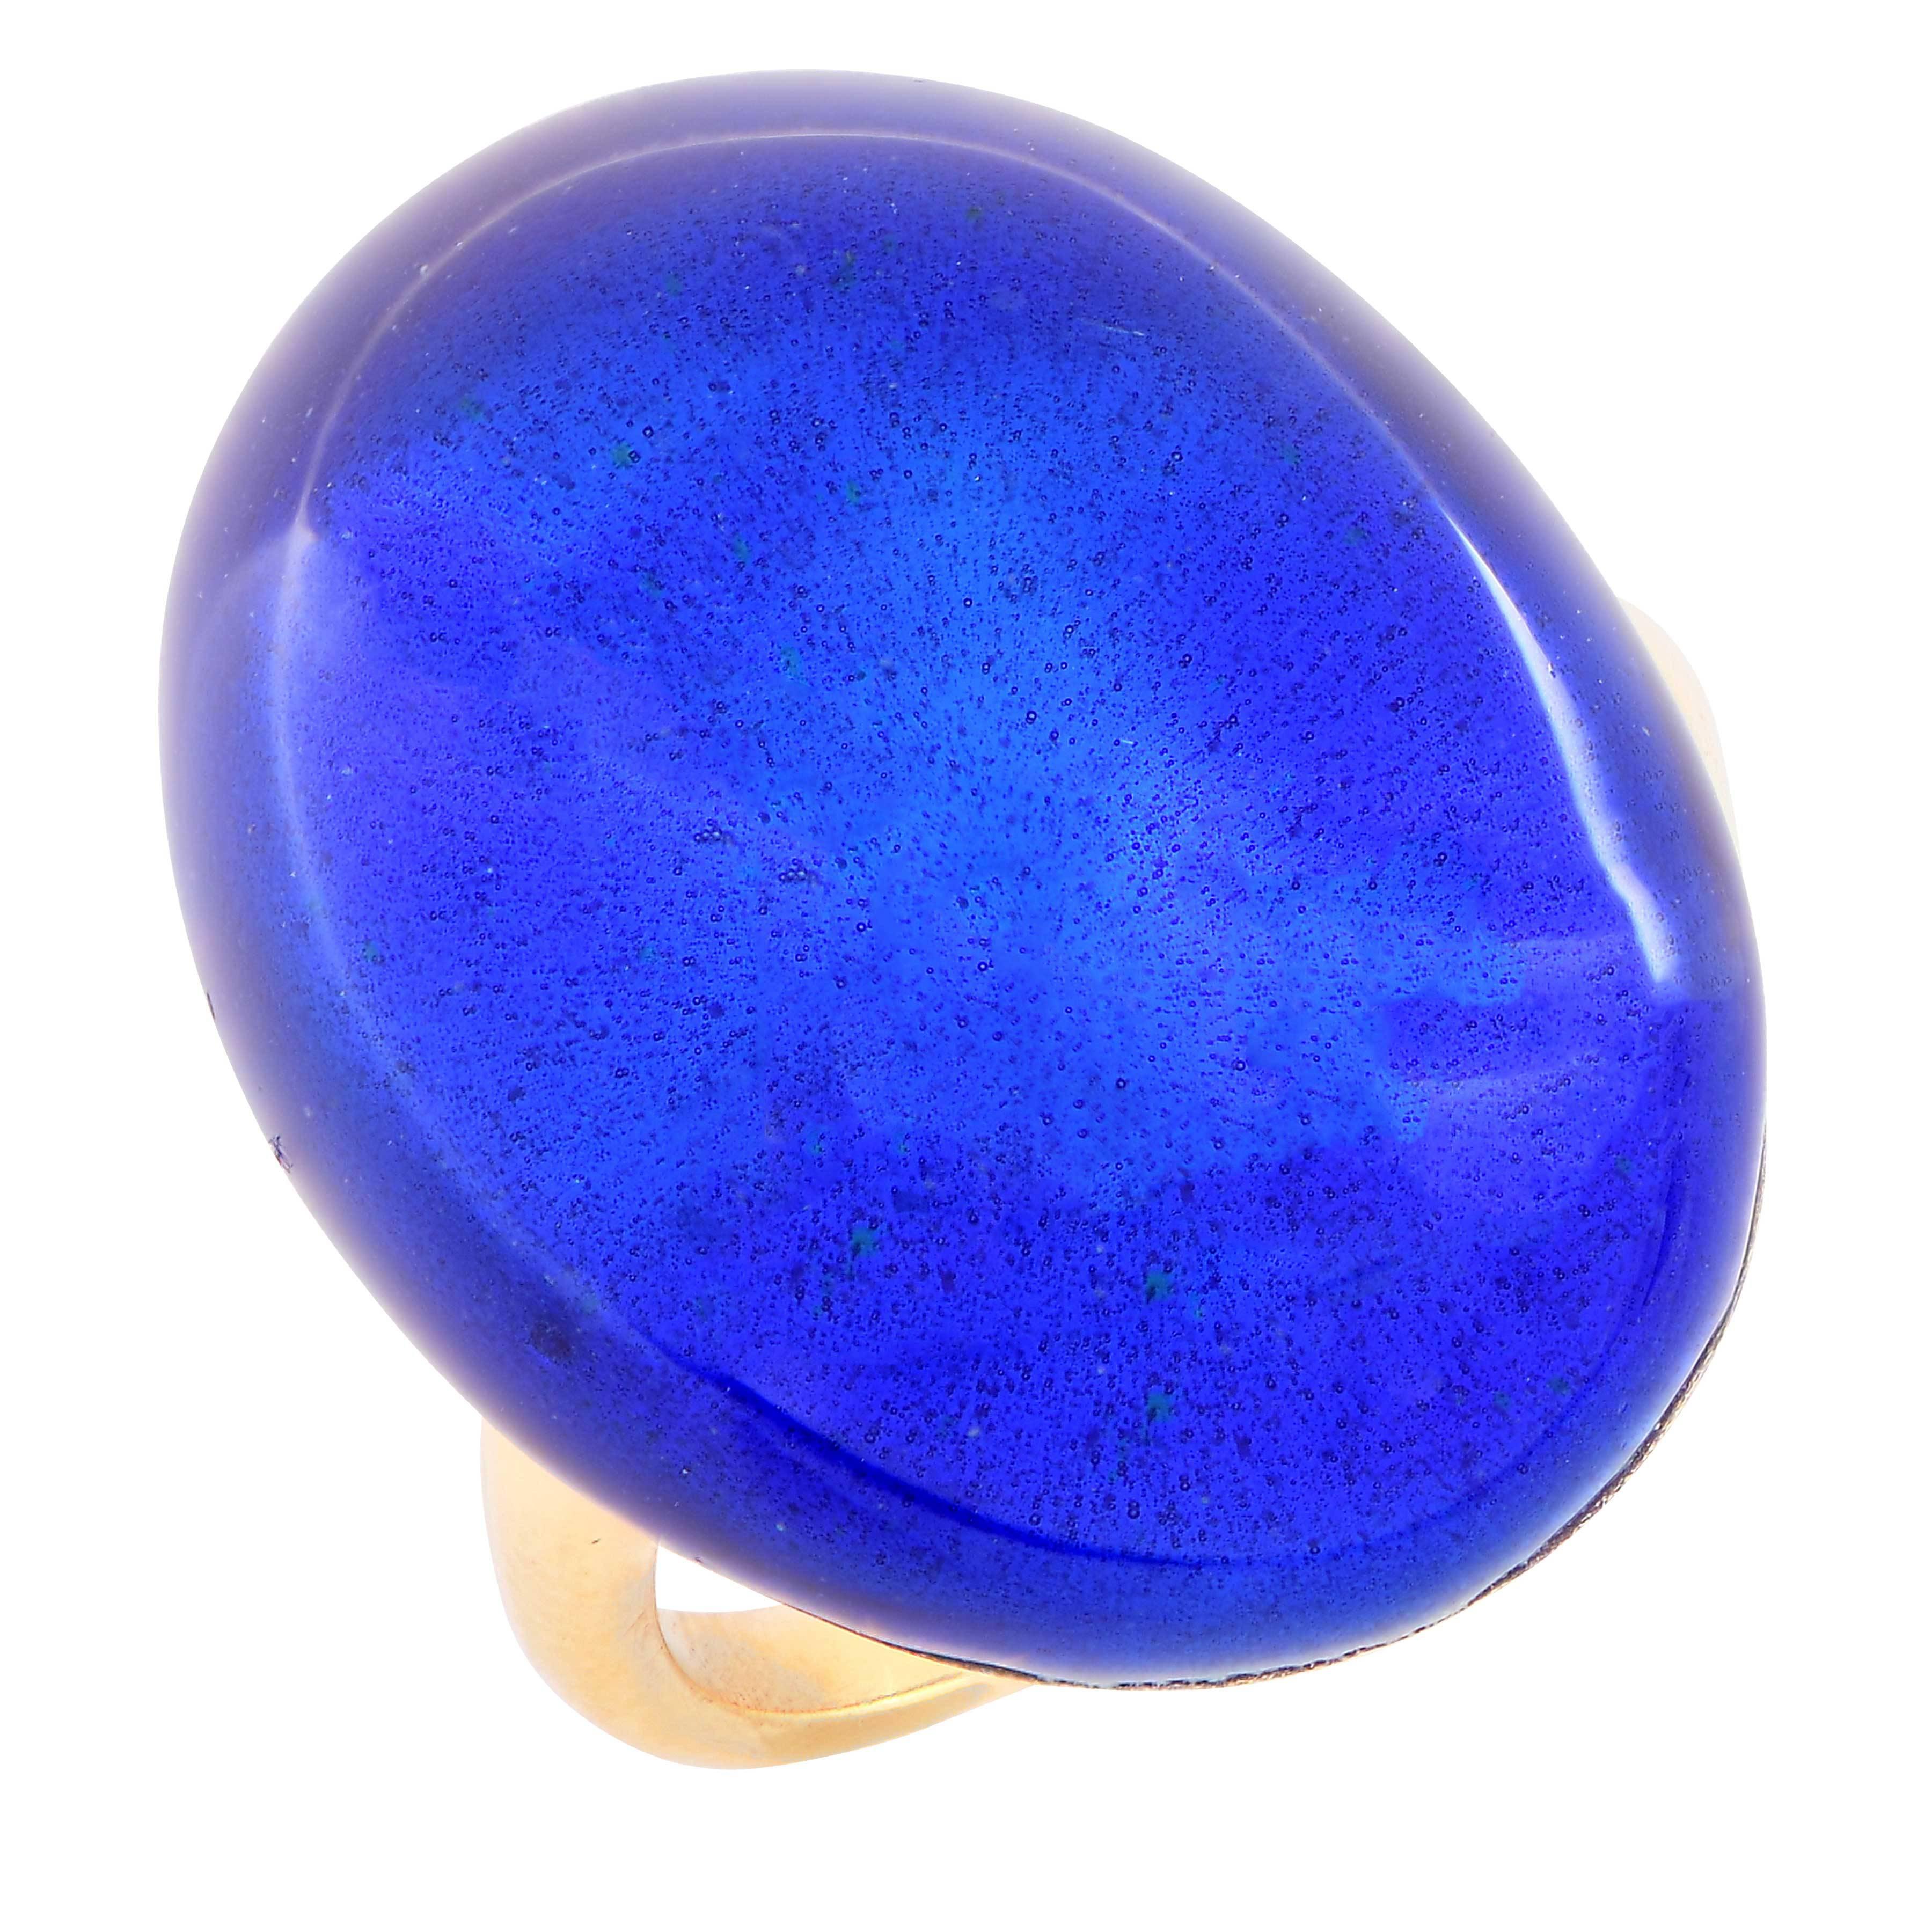 Carvin French Blue Enamel Bombe 18 Karat Yellow Gold Ring In Excellent Condition For Sale In Bay Harbor Islands, FL